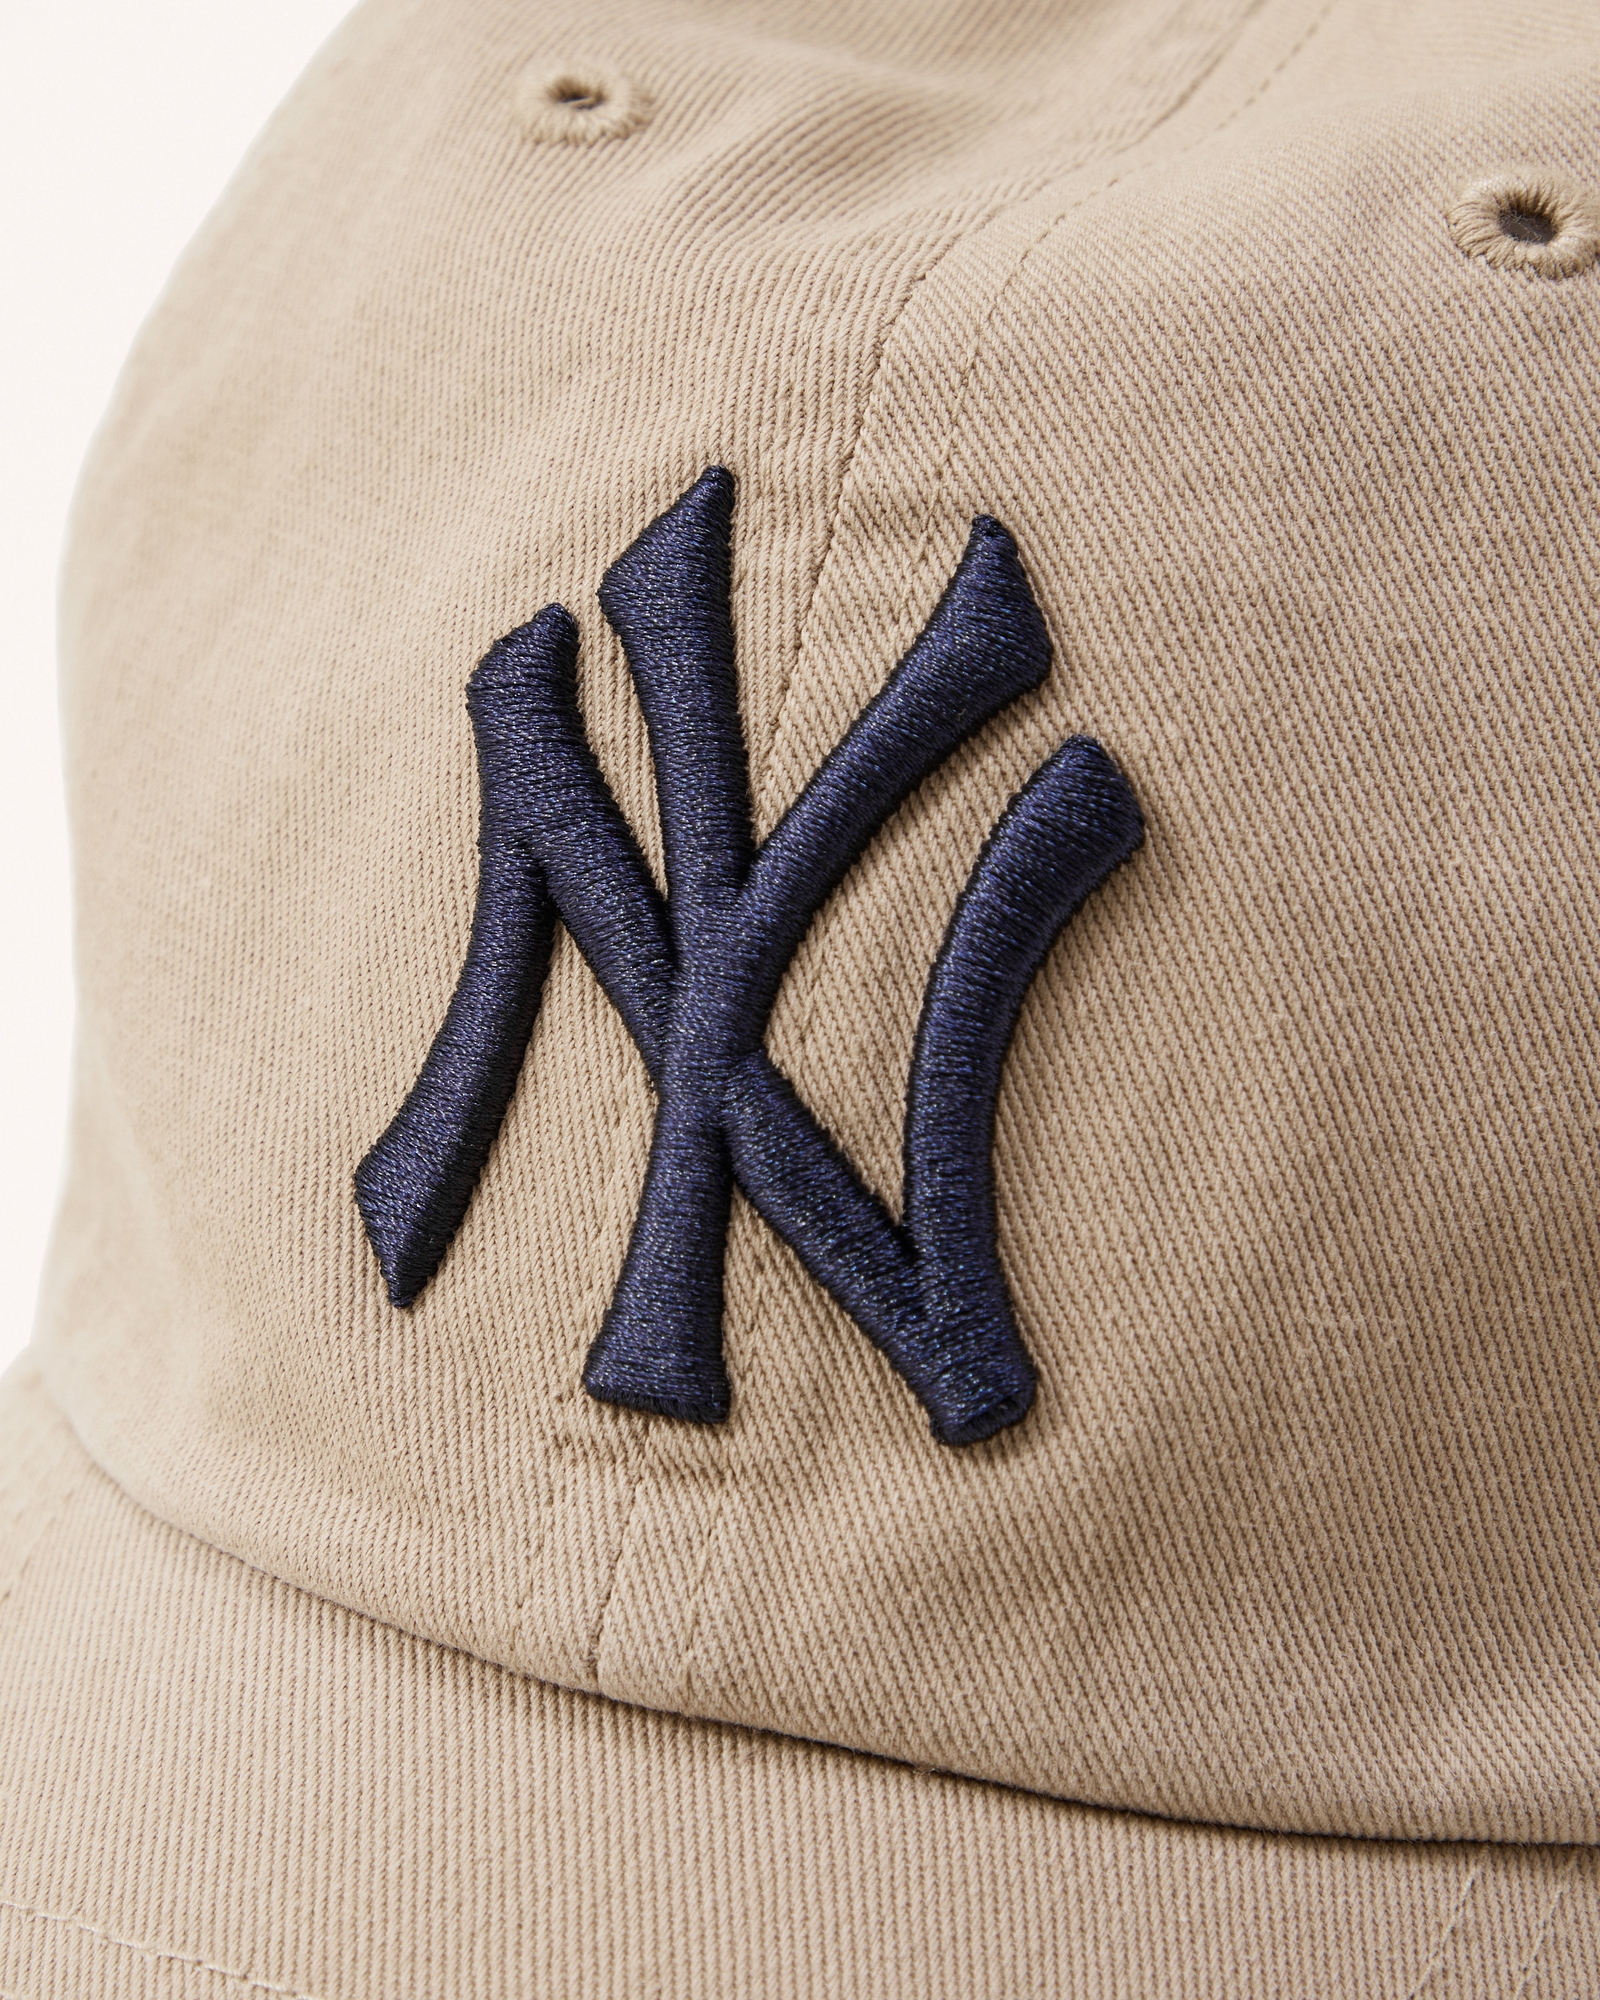 yankees fathers day hat 2023